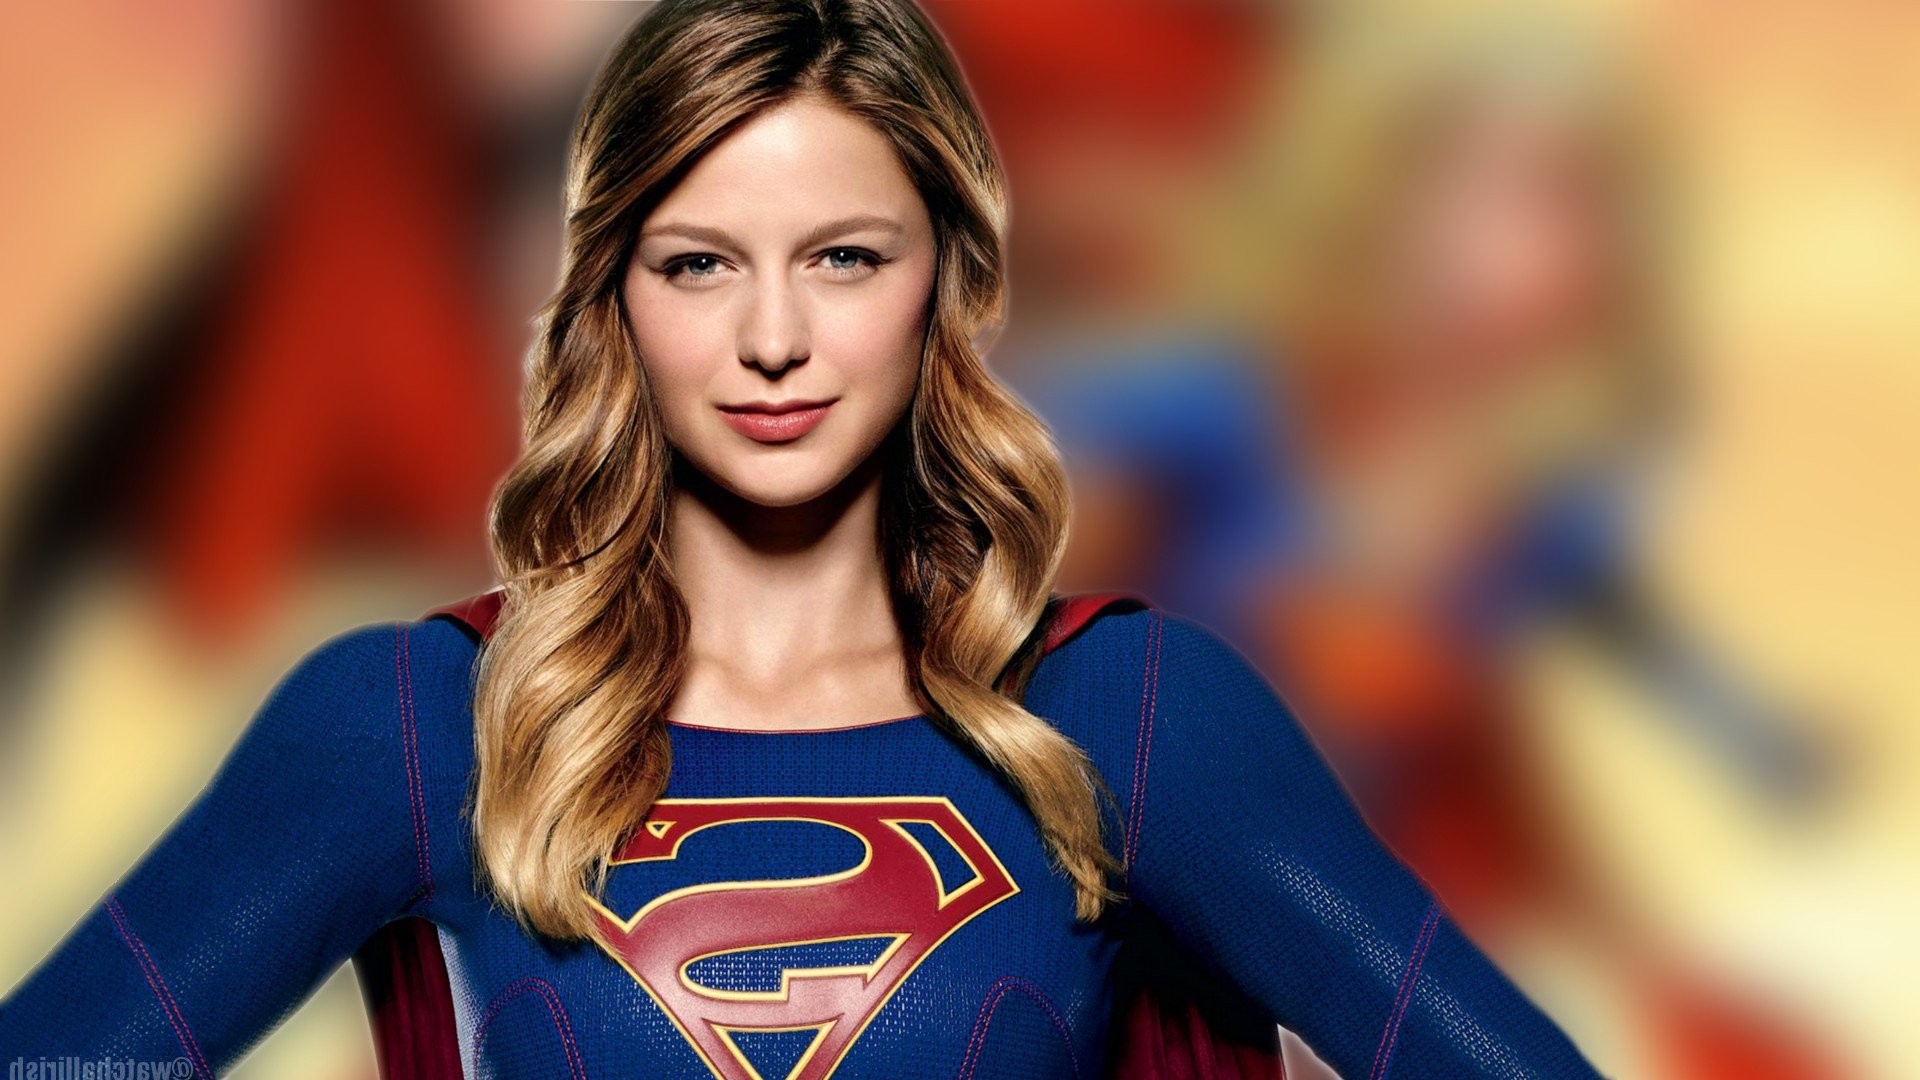 1920x1080 undefined Supergirl Wallpaper (45 Wallpapers) | Adorable Wallpapers |  Wallpapers | Pinterest | Melissa benoist, Wallpaper free download and  Wallpaper